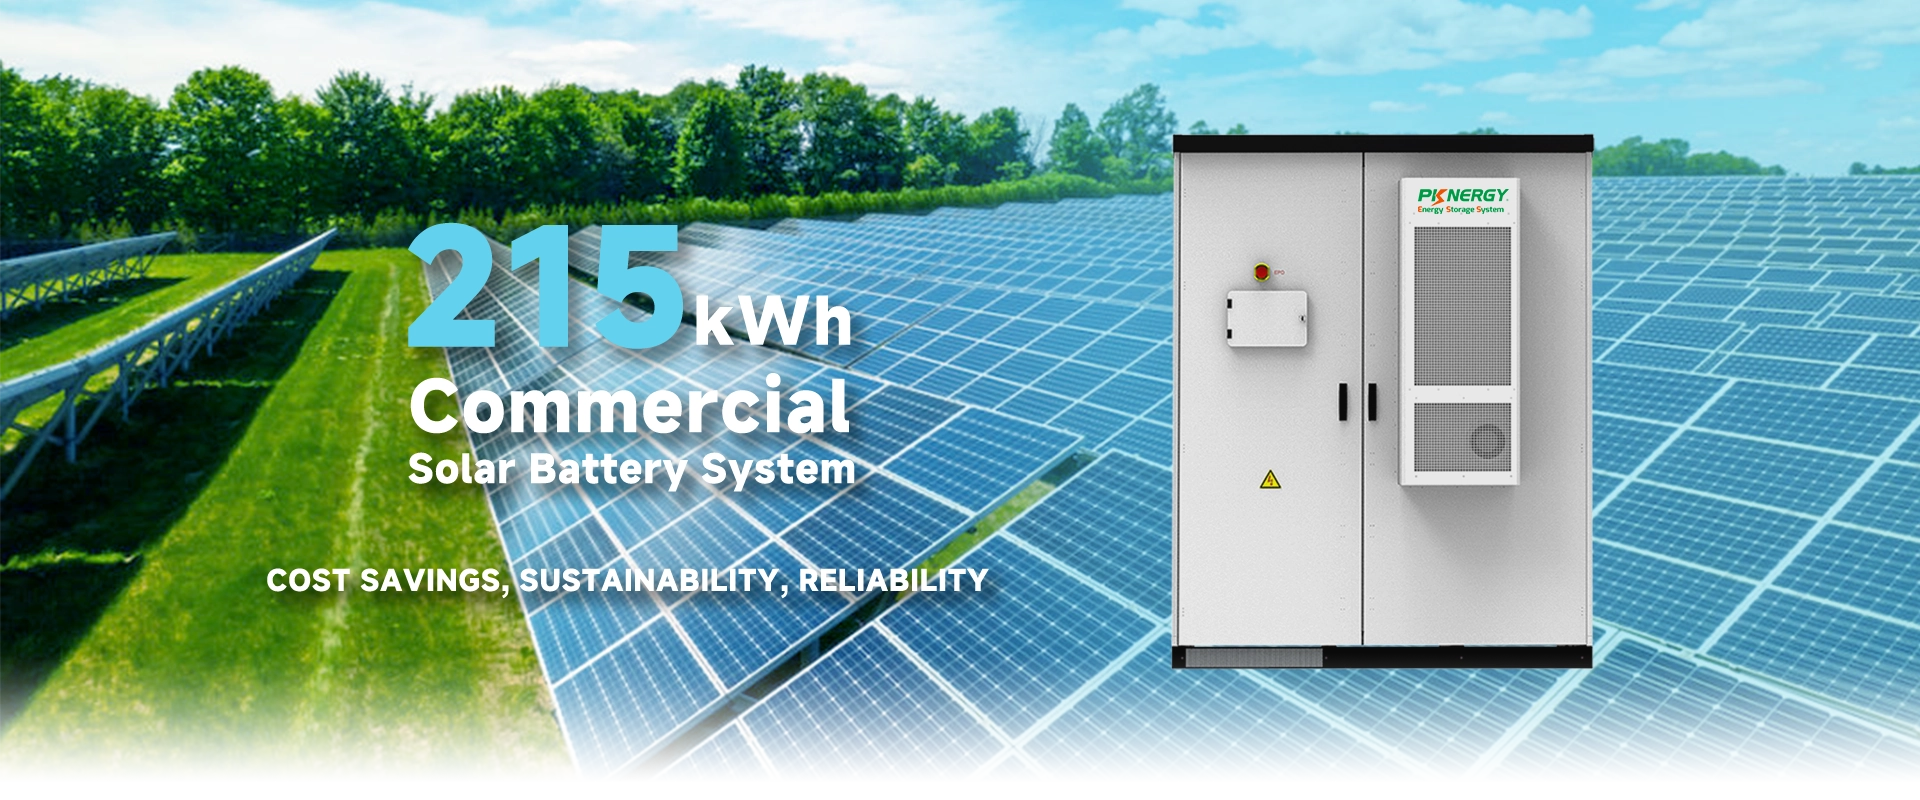 Outdoor 200kWh Commercial Solar Battery